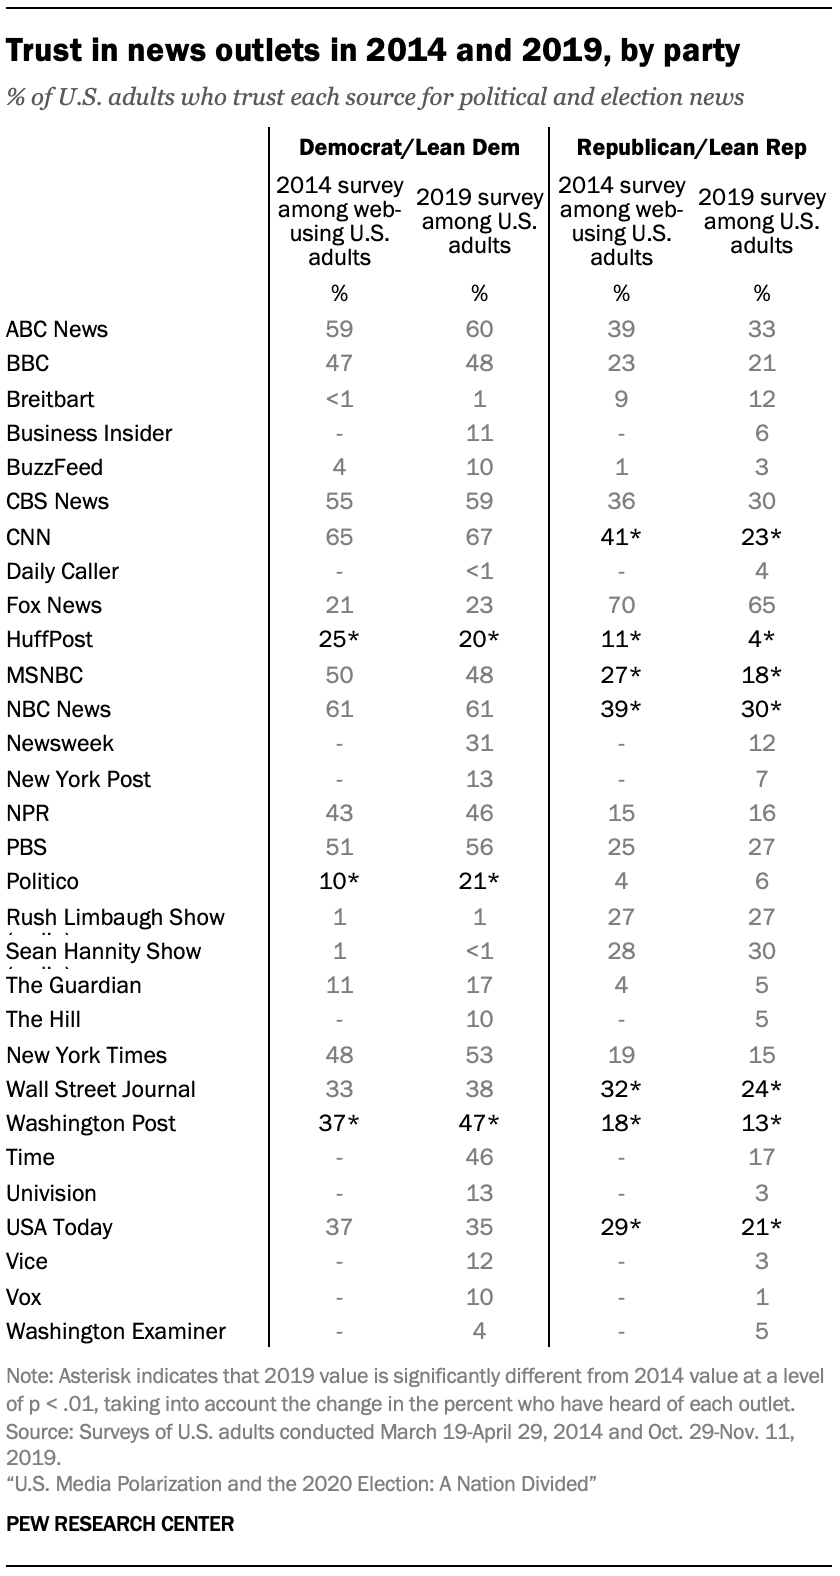 Trust in news outlets in 2014 and 2019, by party